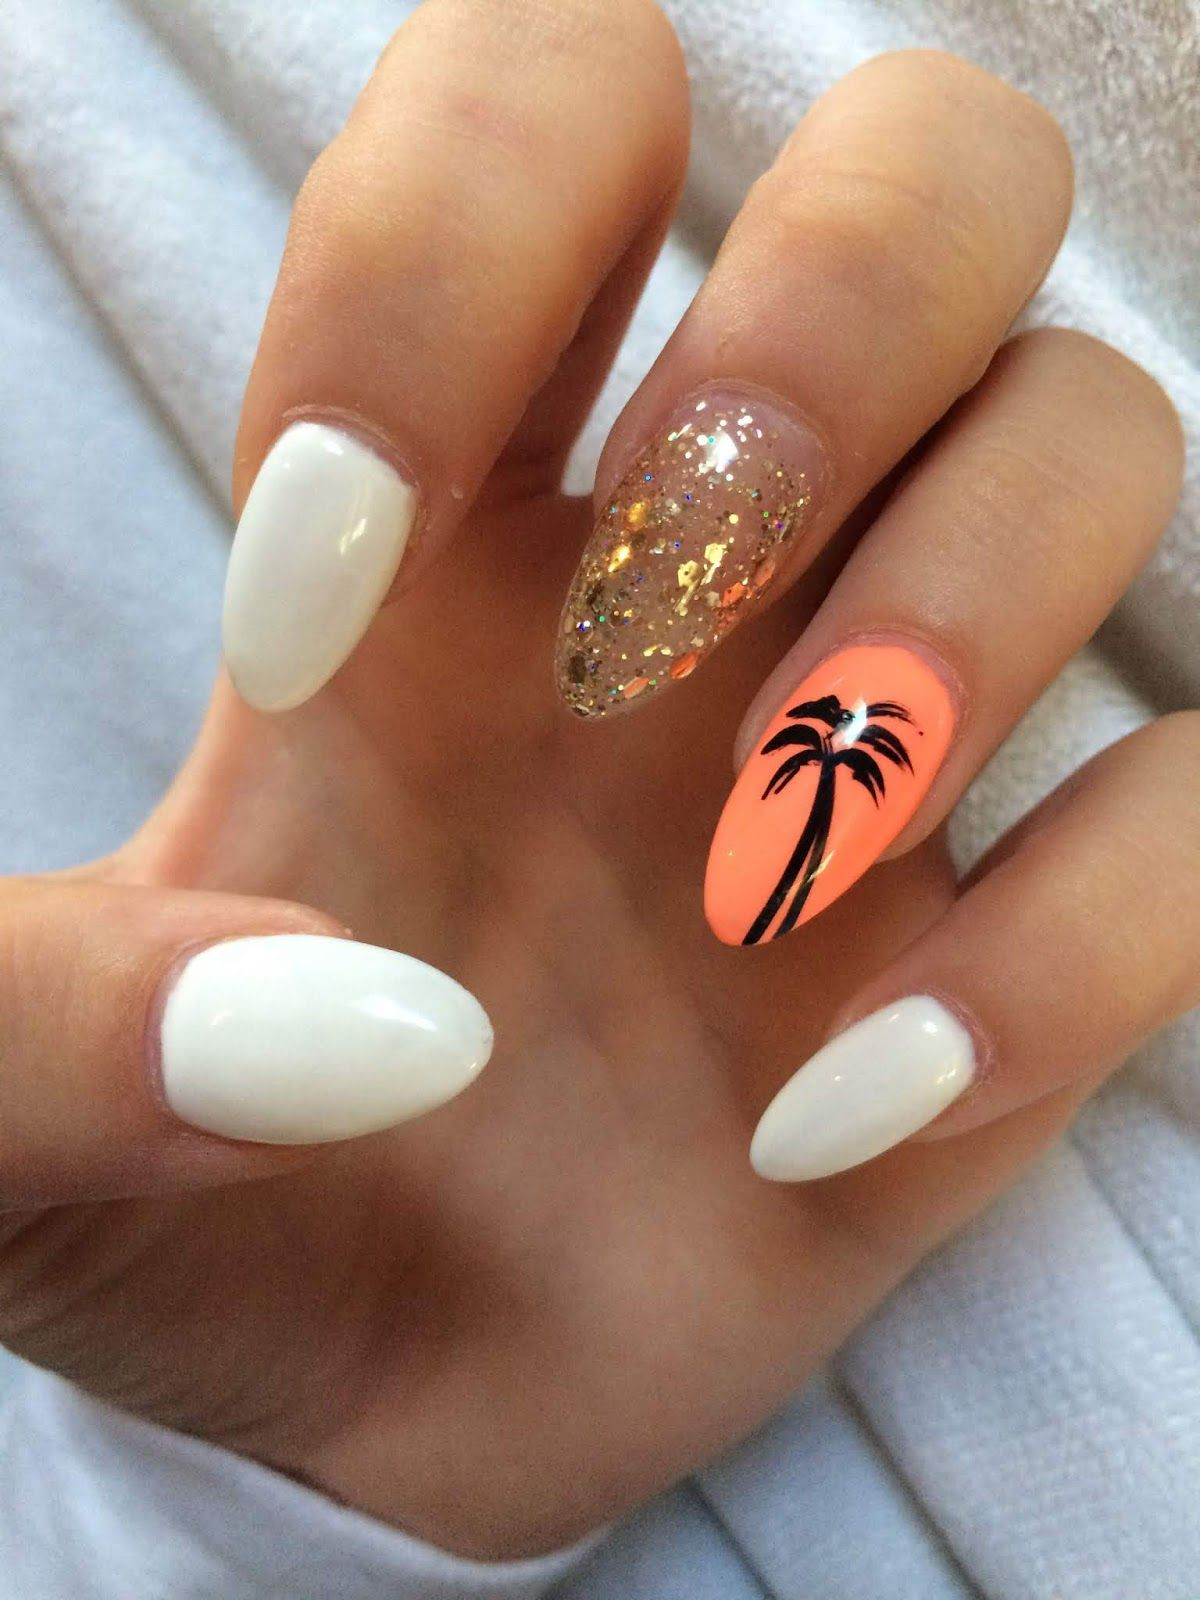 10 Amazing Cute Nail Ideas For Acrylic Nails 100 cutest nail designs summer acrylic d0bdd0bed0b3d182d0b8 onglerie ongles 2024